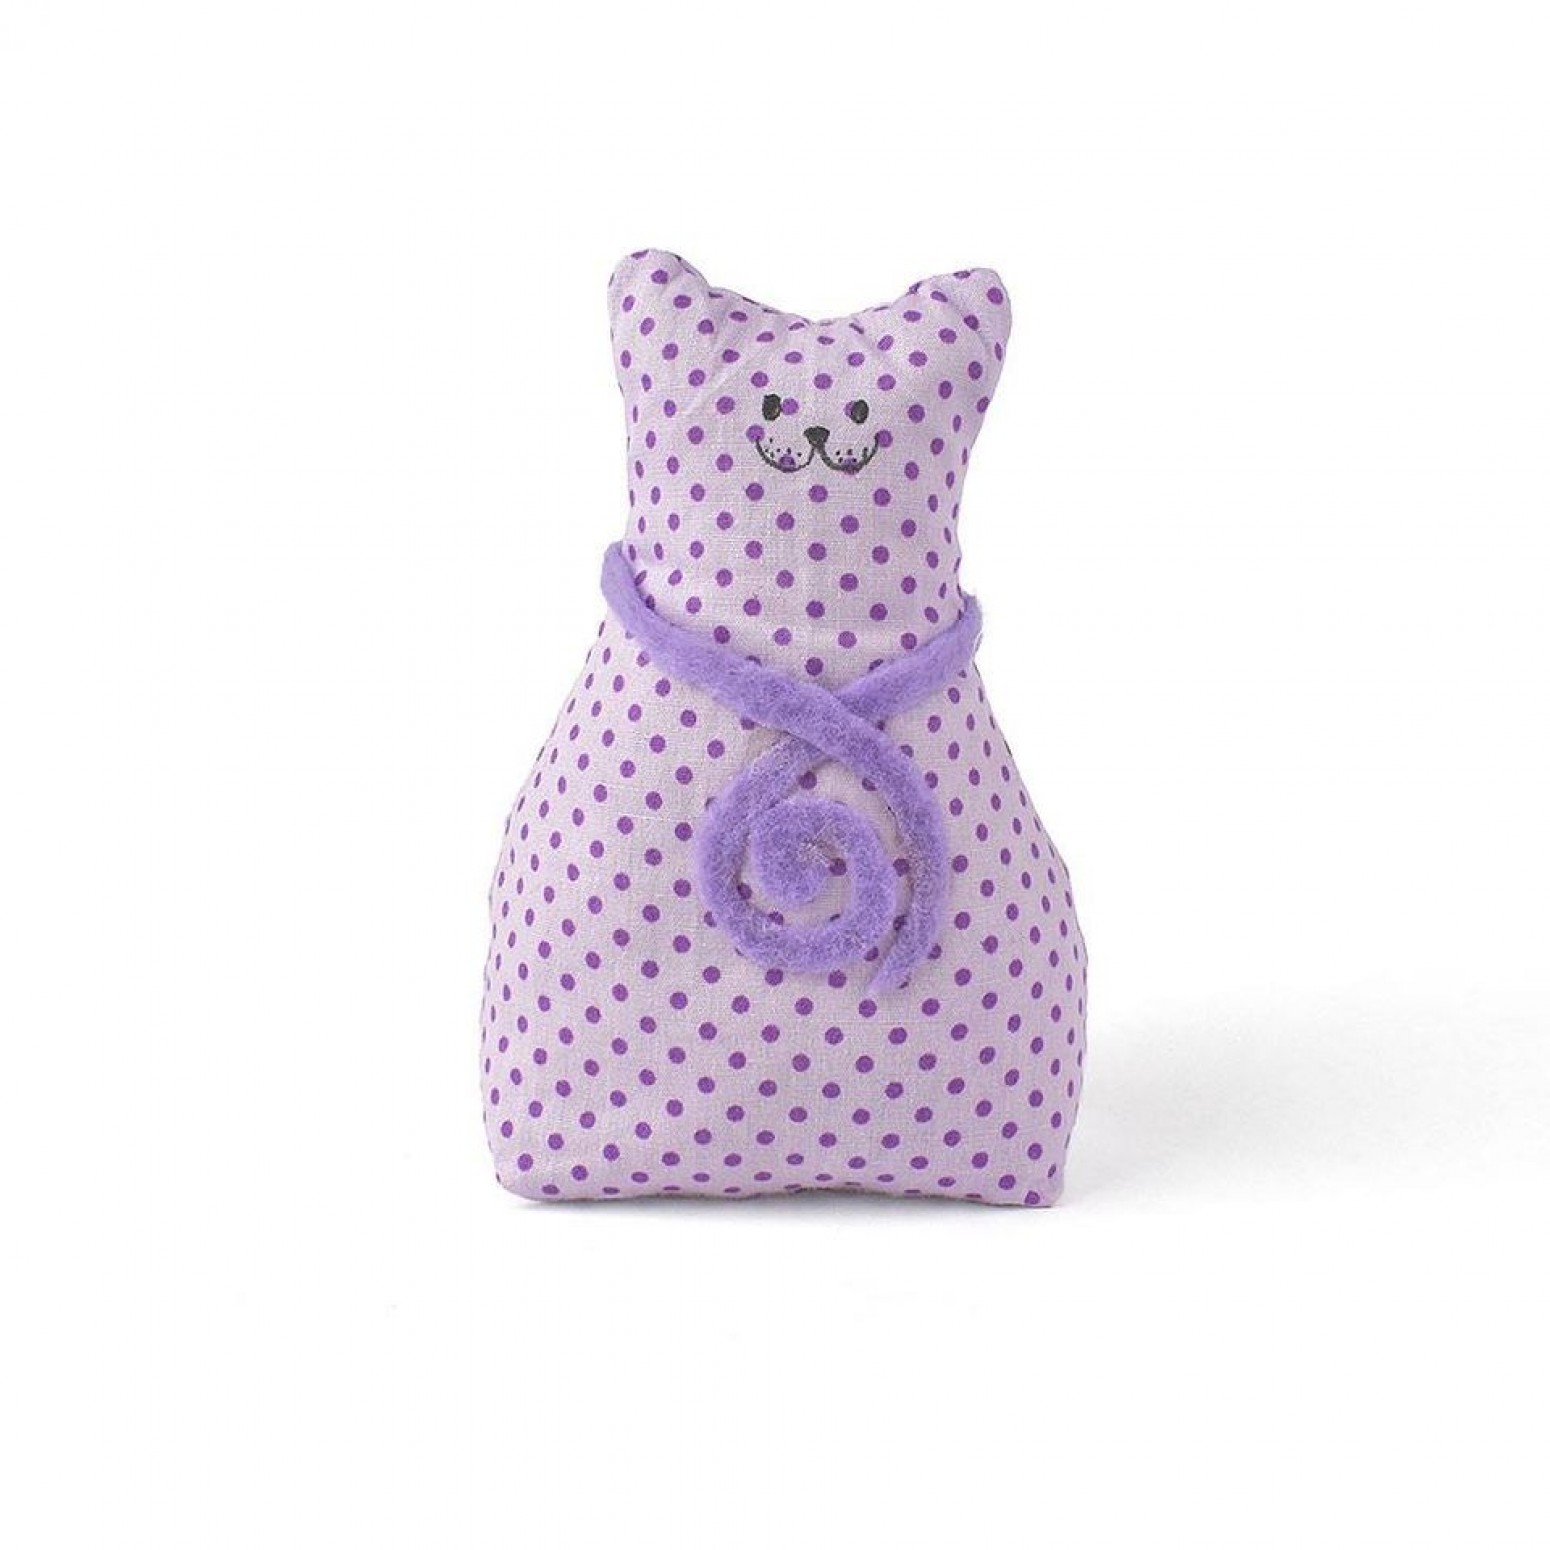 Doll with lavender blossom - kitten hanging